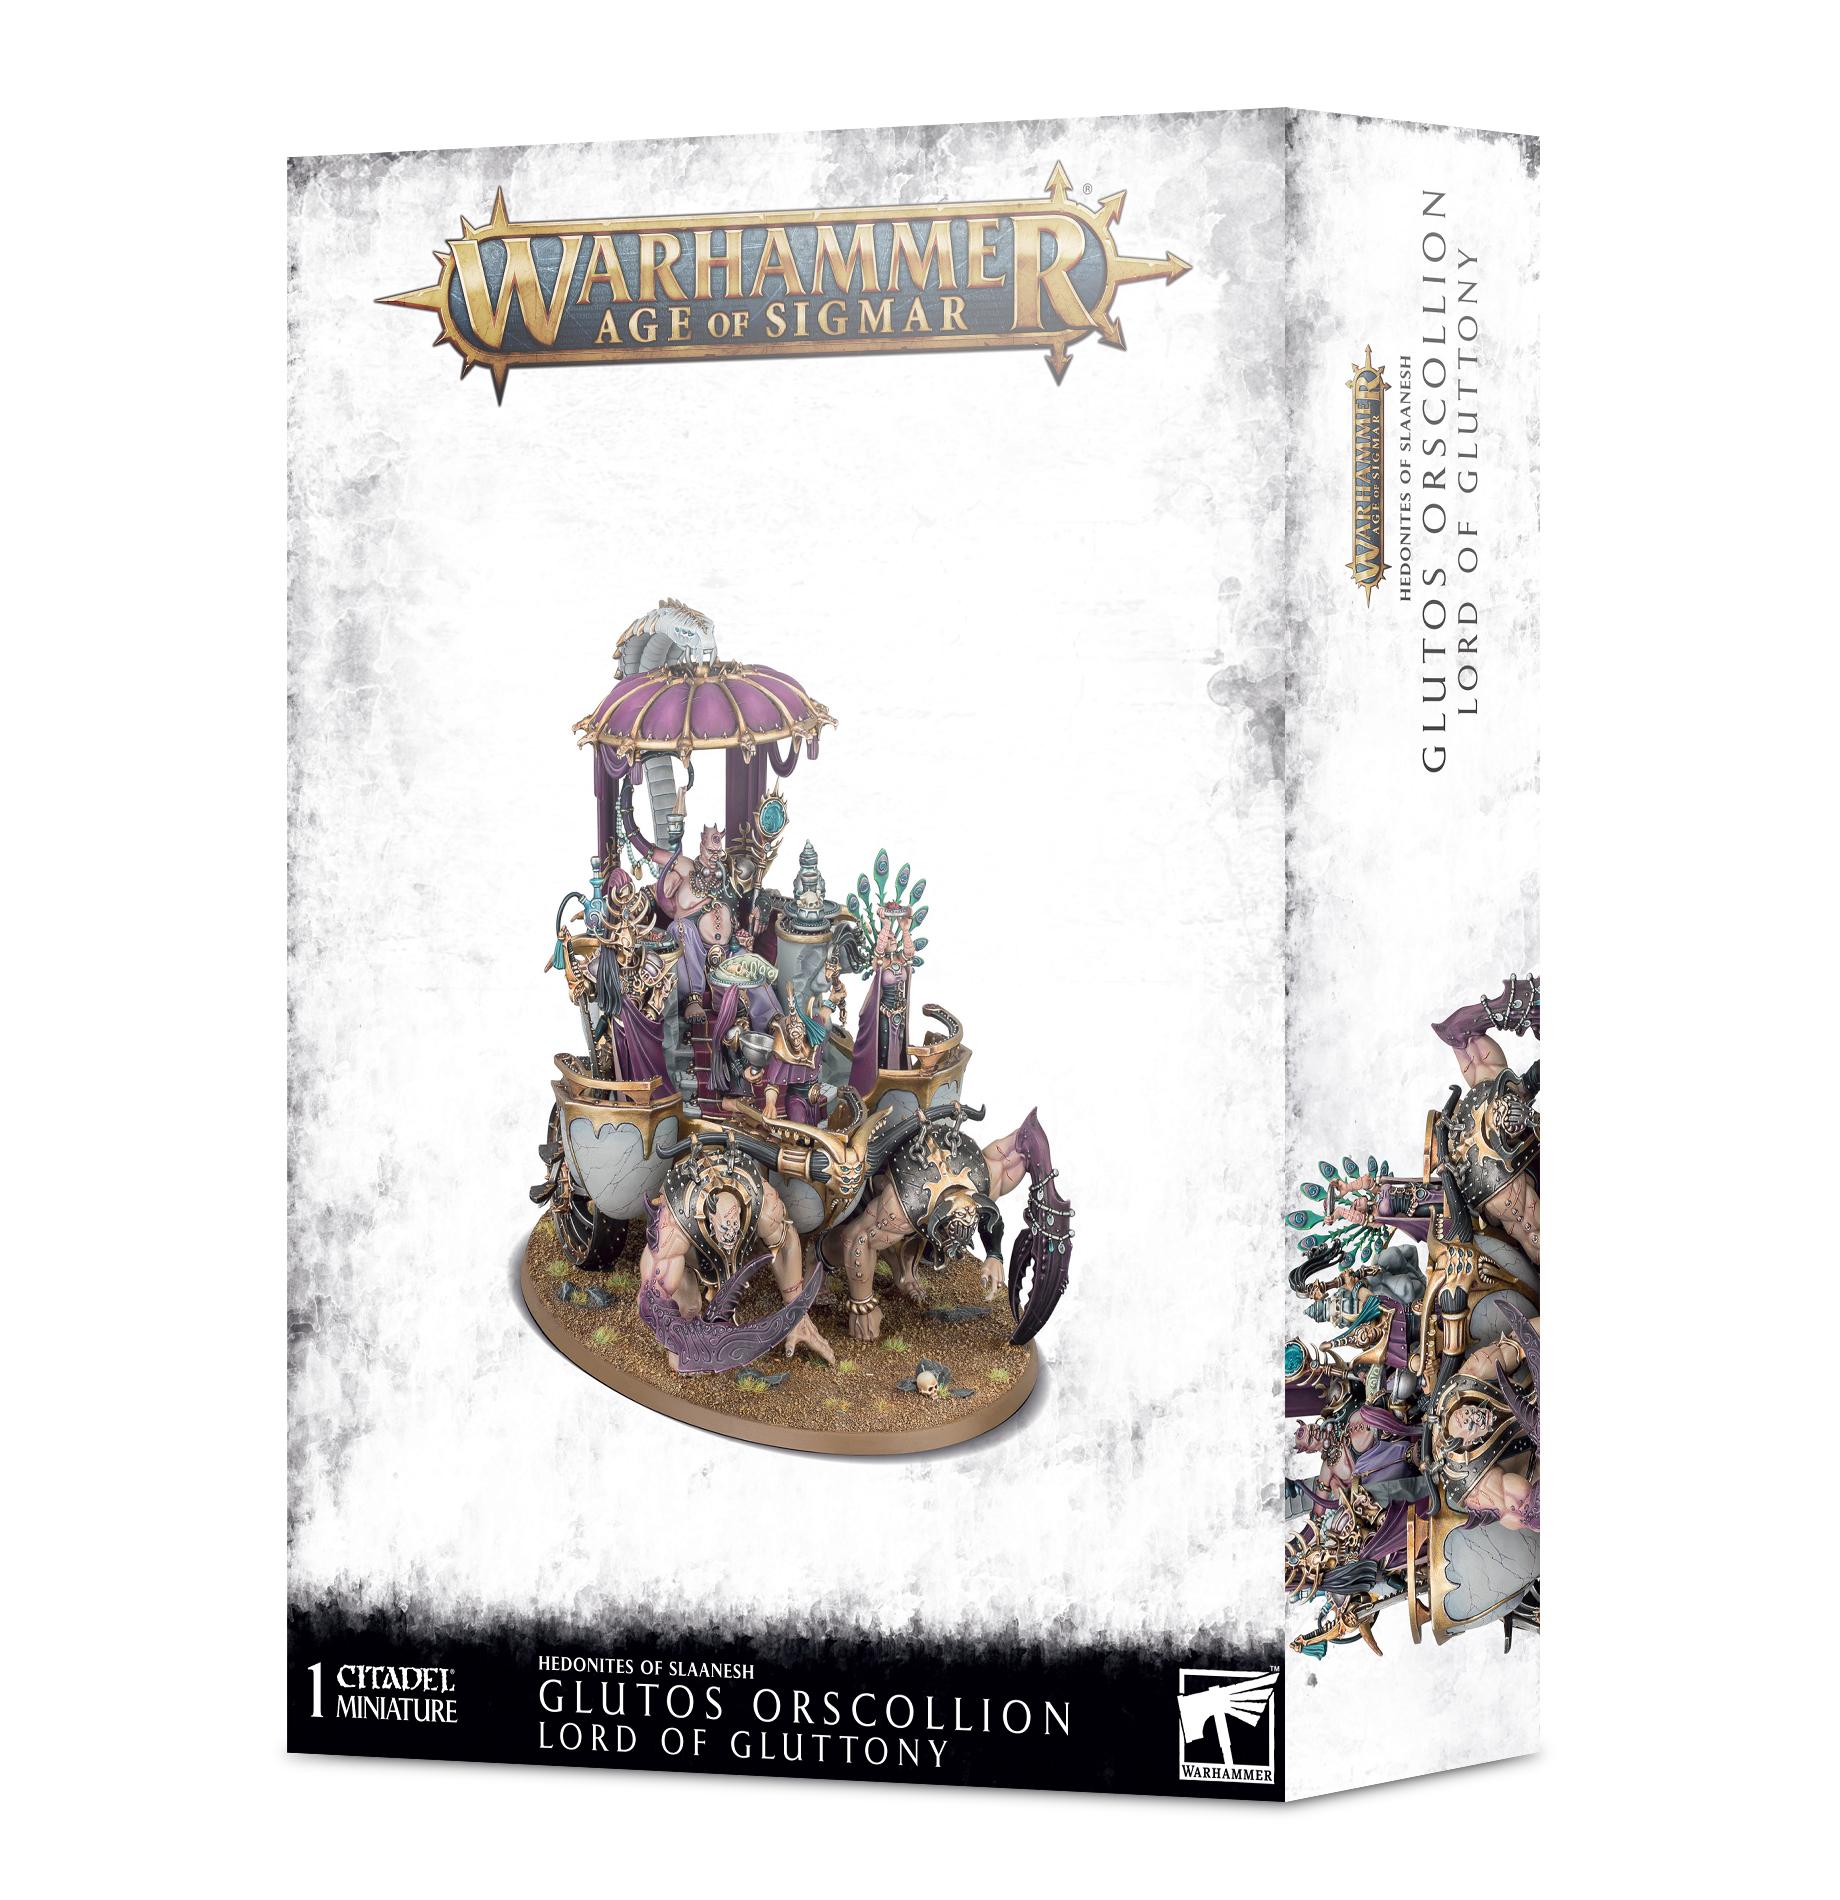 Warhammer: Age of Sigmar - Hedonites of Slaanesh: Glutos Orscollion, Lord of Gluttony